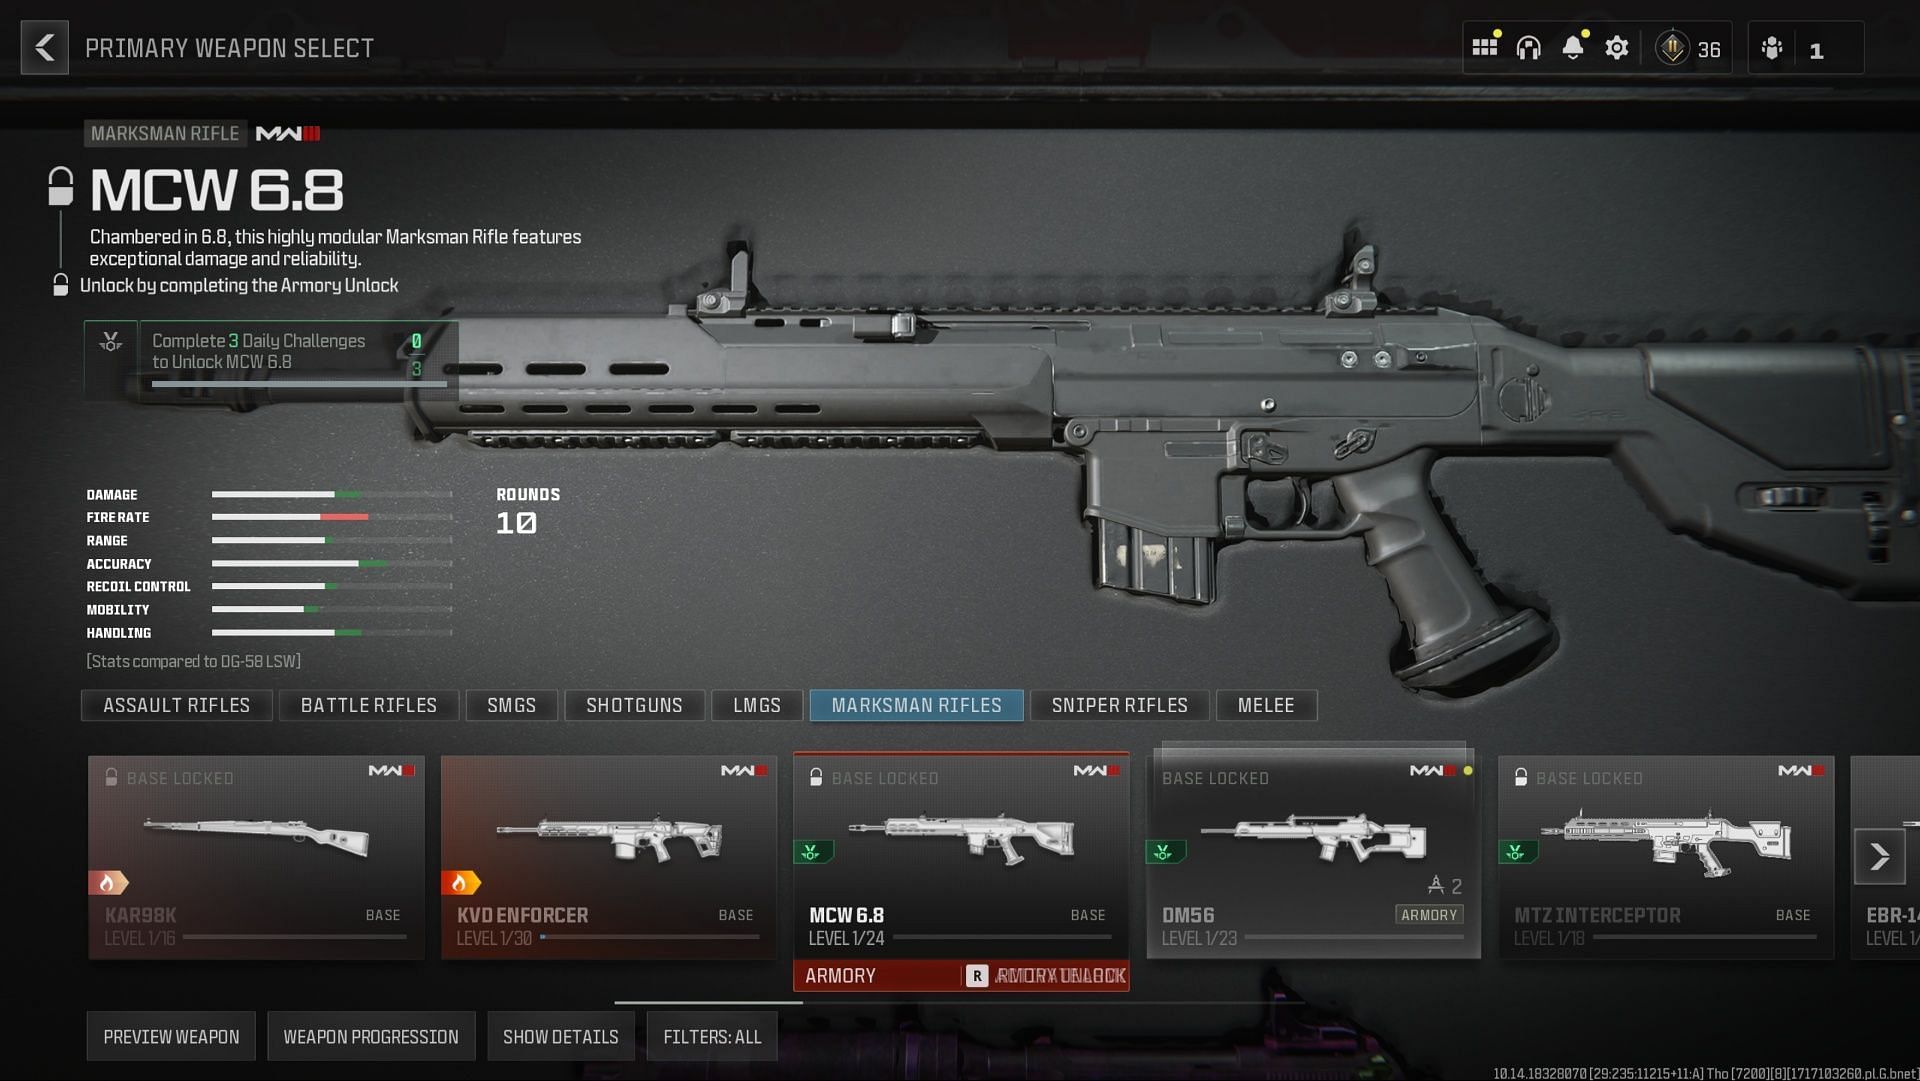 MCW 5.6 marksman rifle in Warzone (Image via Activision)